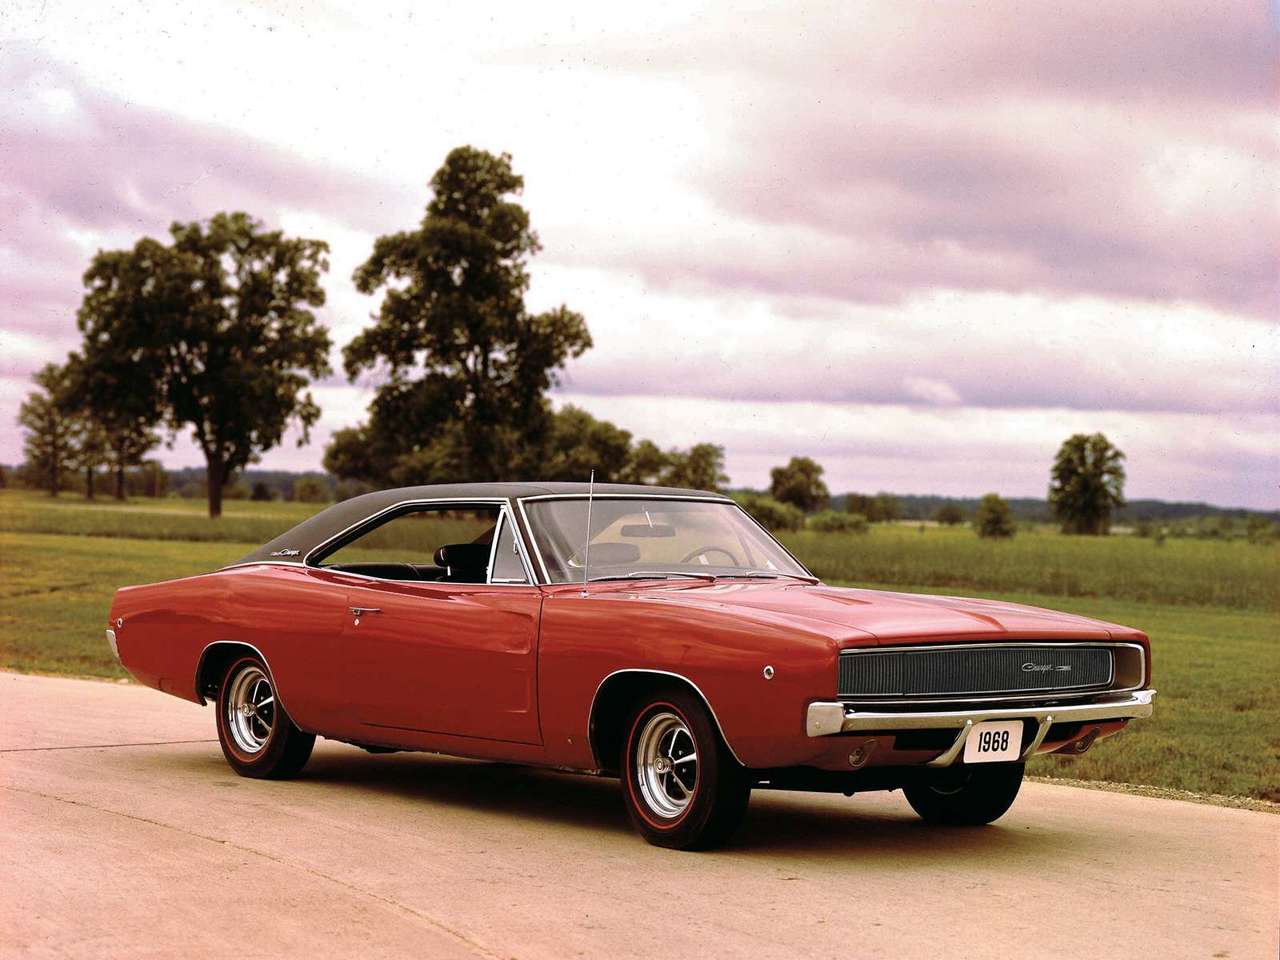 1968 Dodge Charger. Dodge was